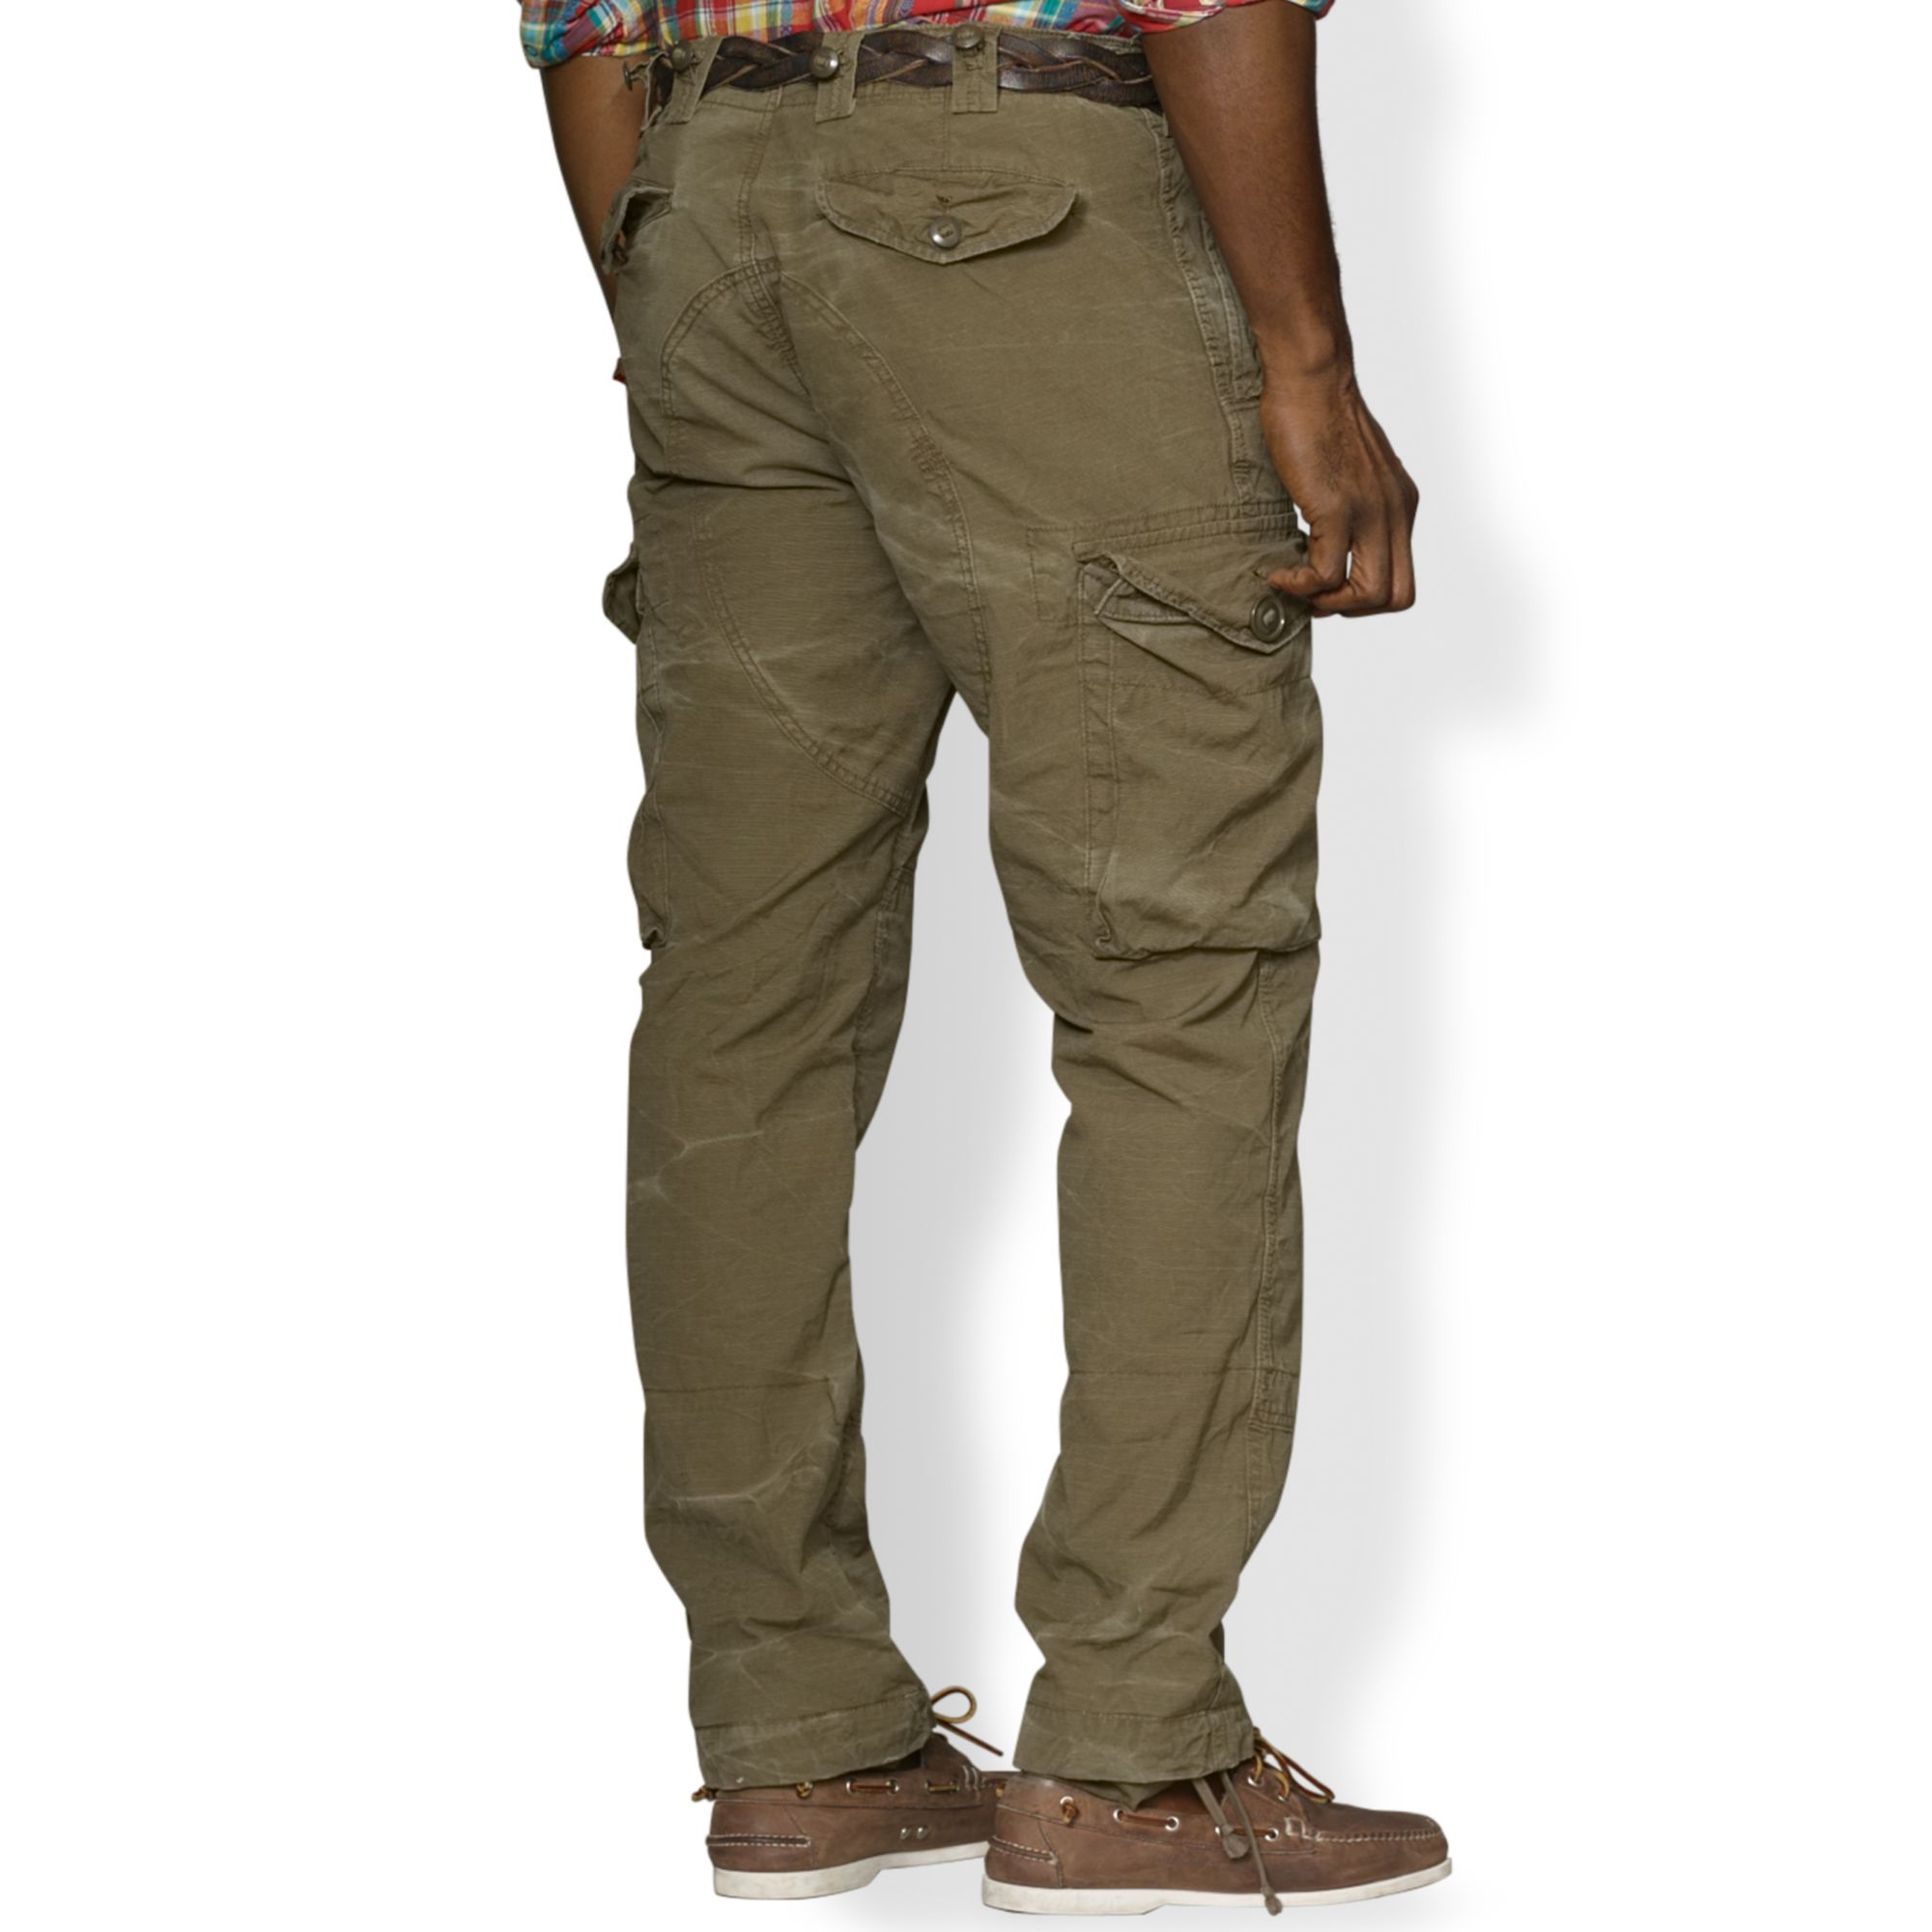 Lyst - Ralph Lauren Polo Big and Tall Classicfit Canadian Ripstop Cargo